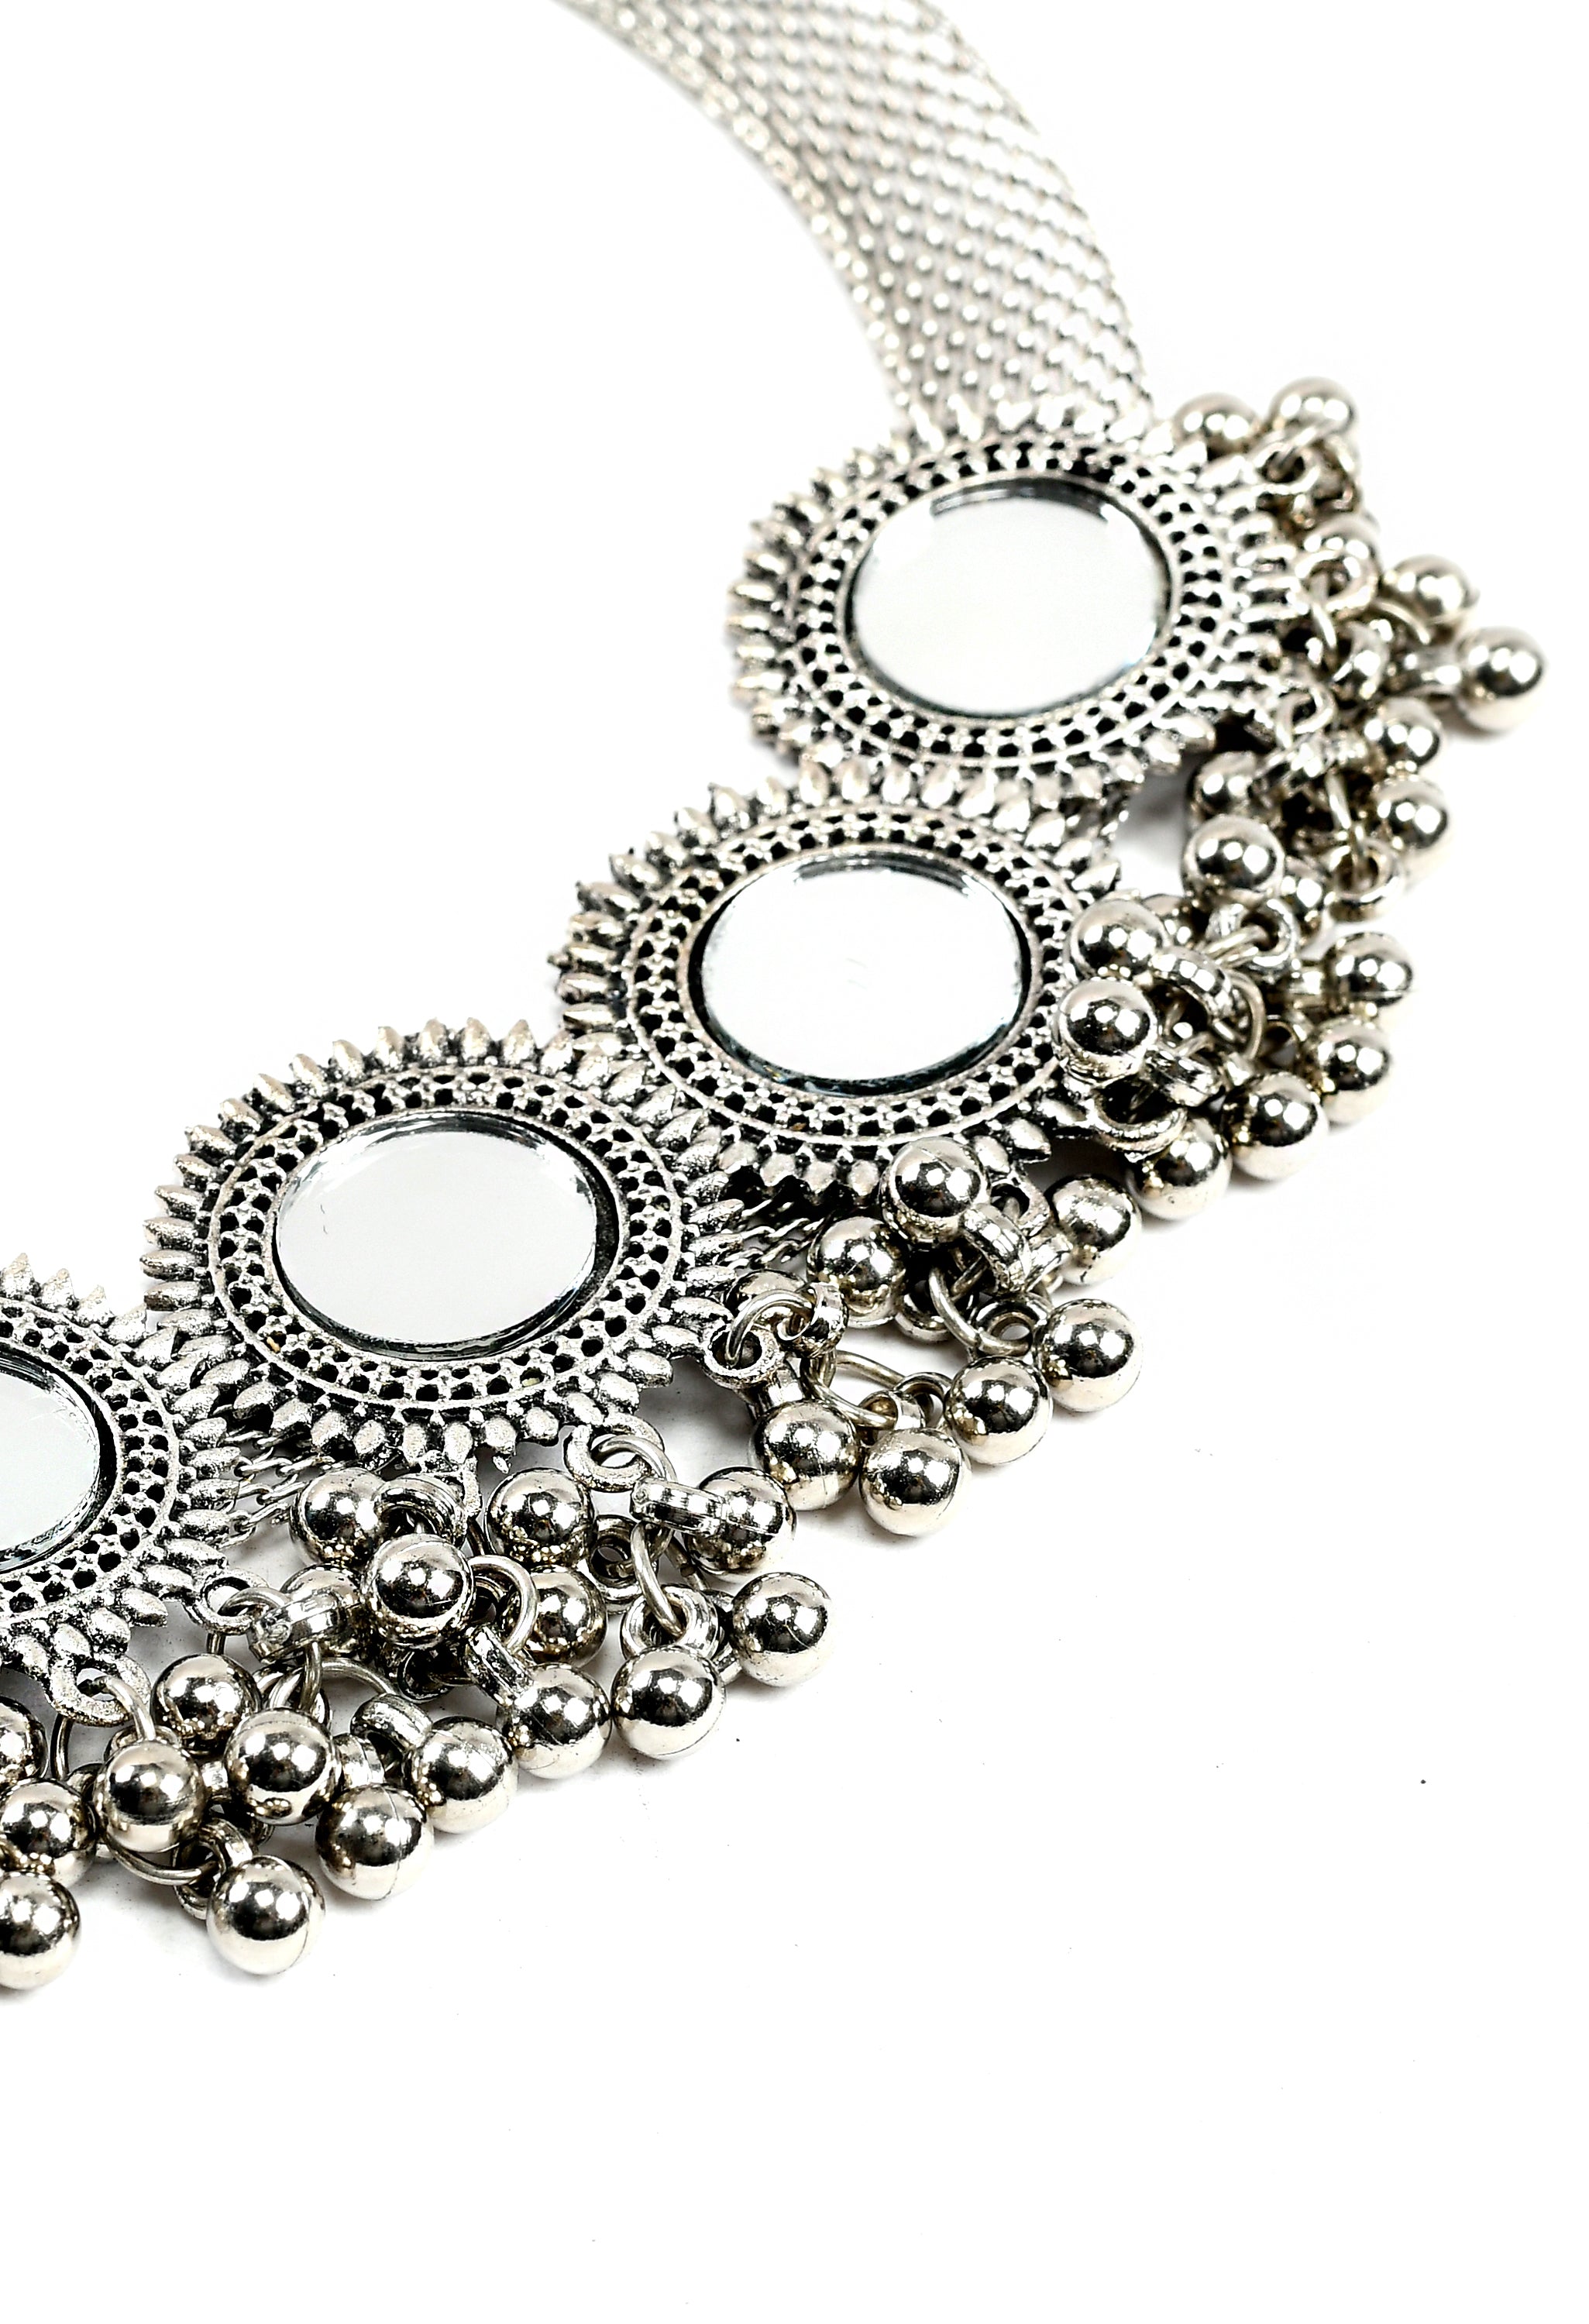 Women's Oxidised Necklaceand Earrings With Mirror And Ghunghru Design - Tehzeeb